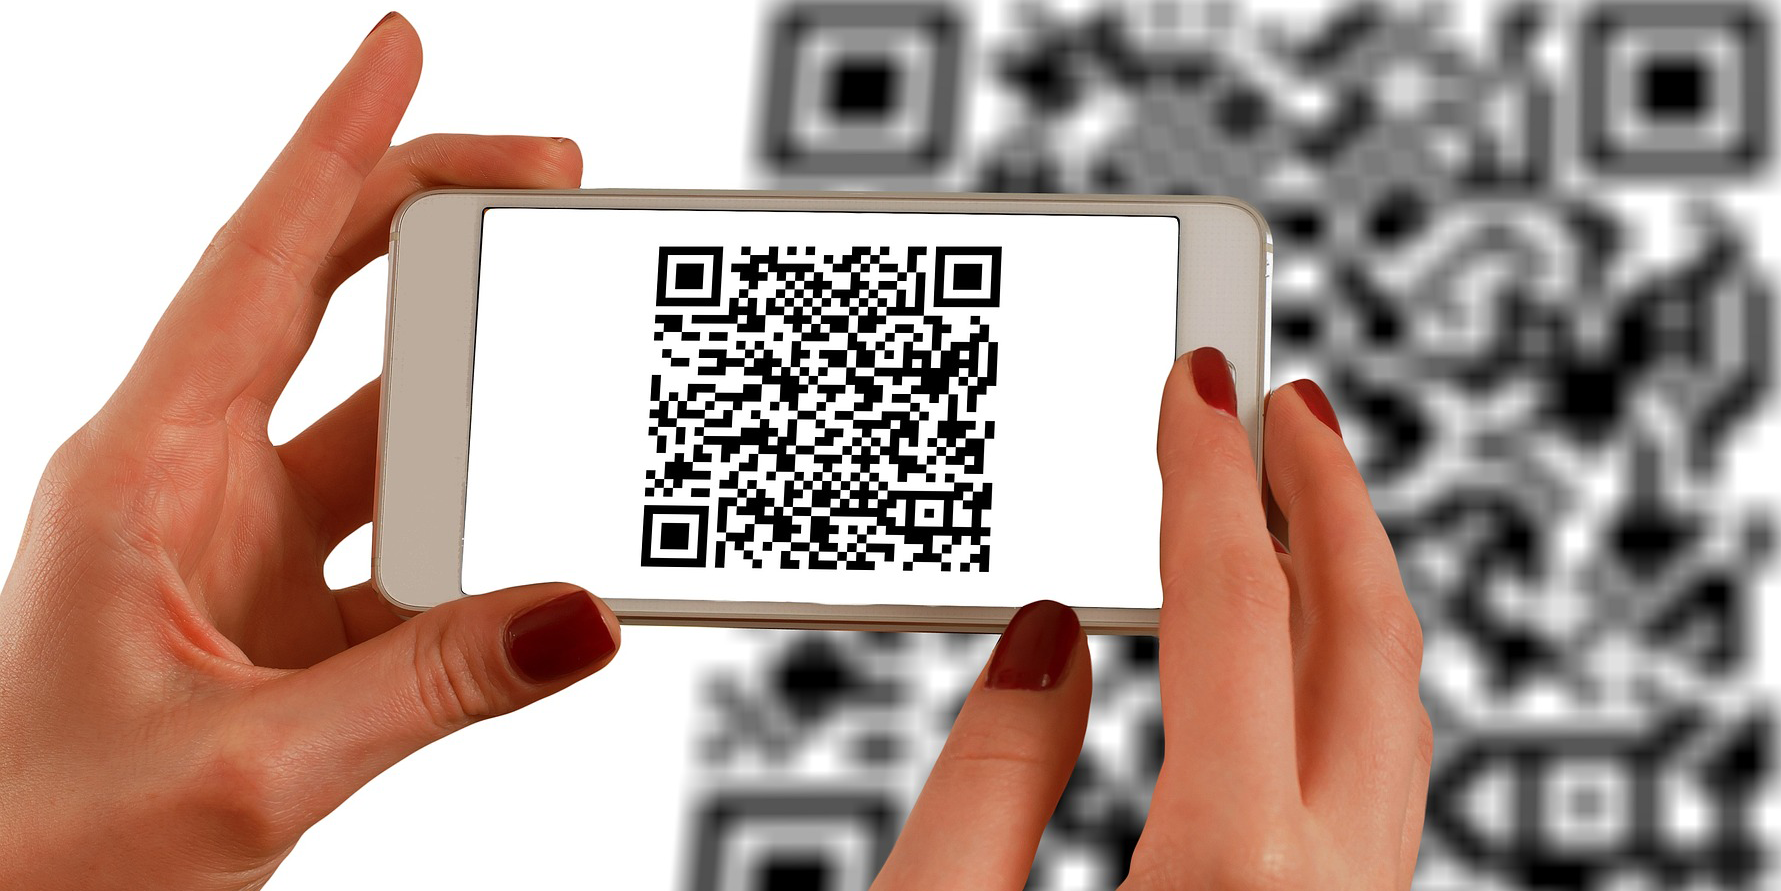 An explanation of what a QR code is